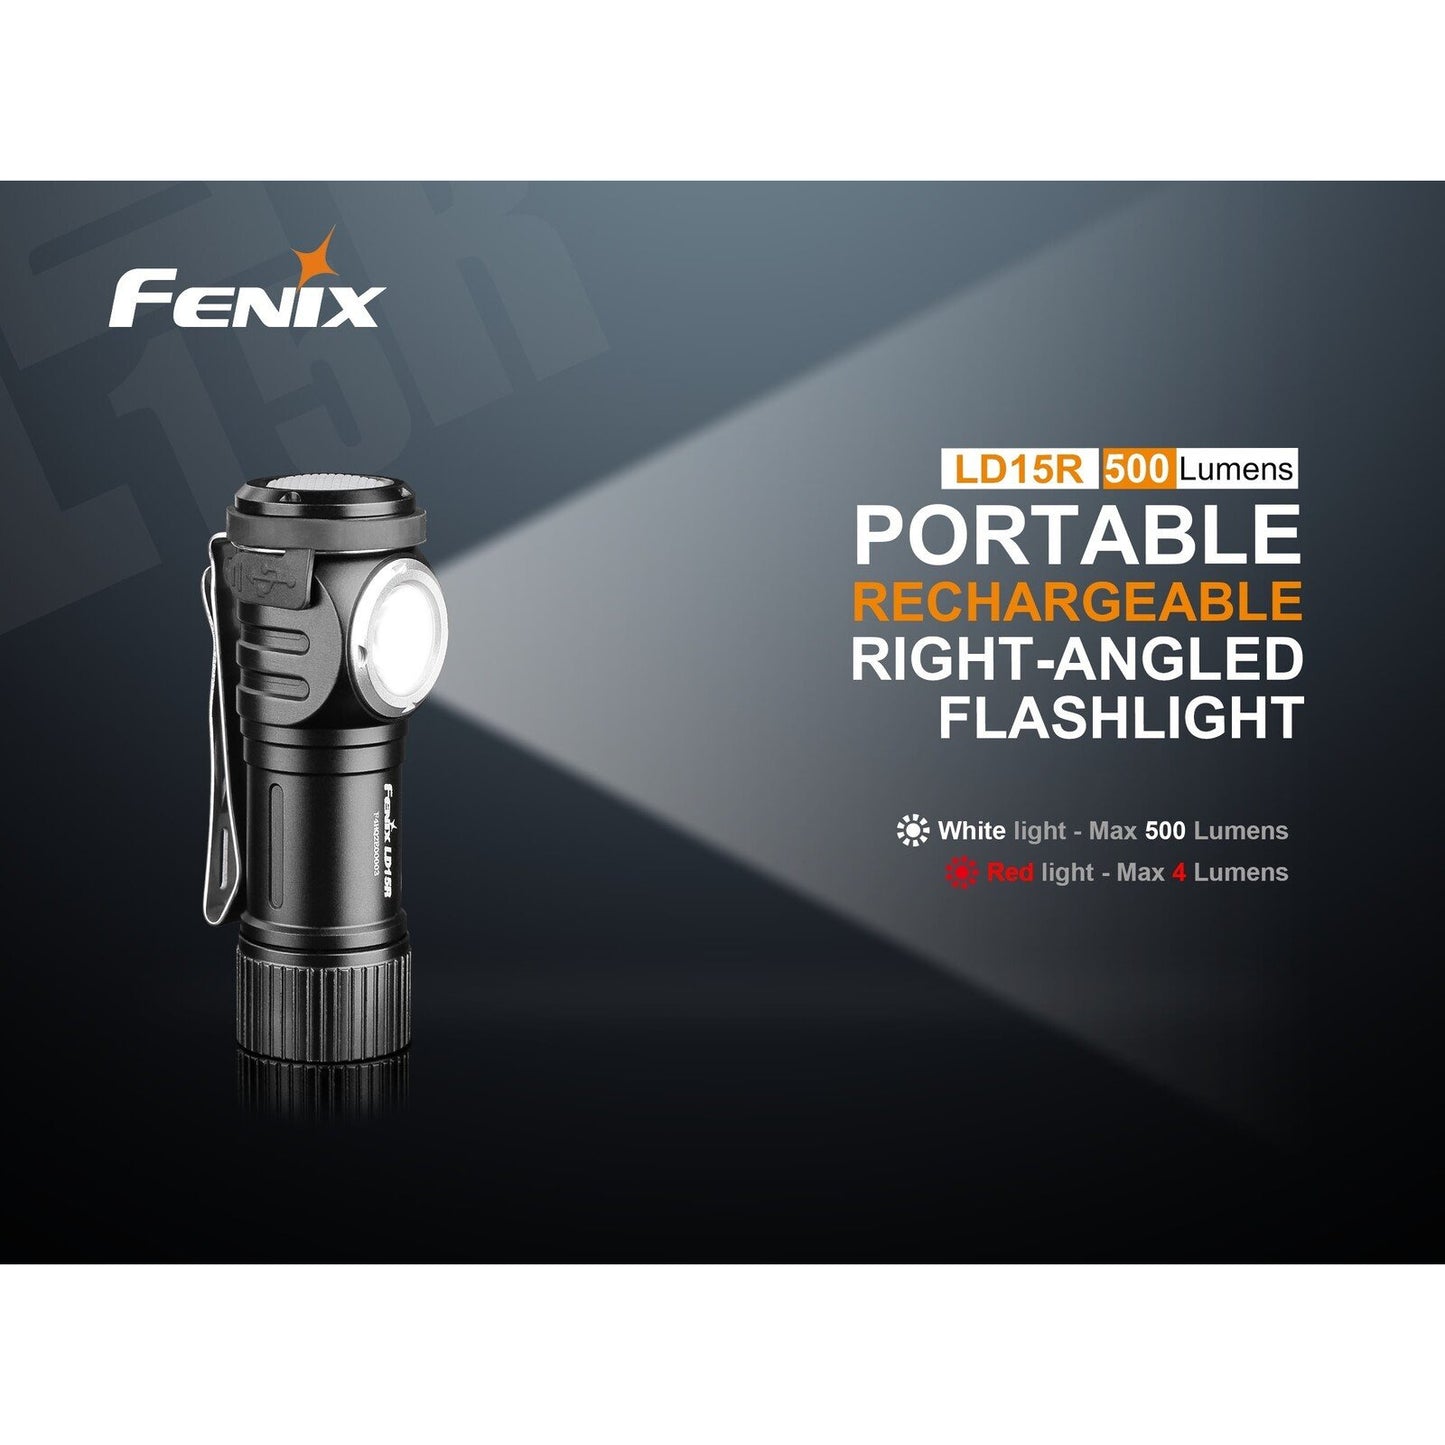 Fenix Fenix 500Lumens Right Angled Led Magnetic Flashlight Working Light - Rechargeable Battery Included #ld15R Slate Gray